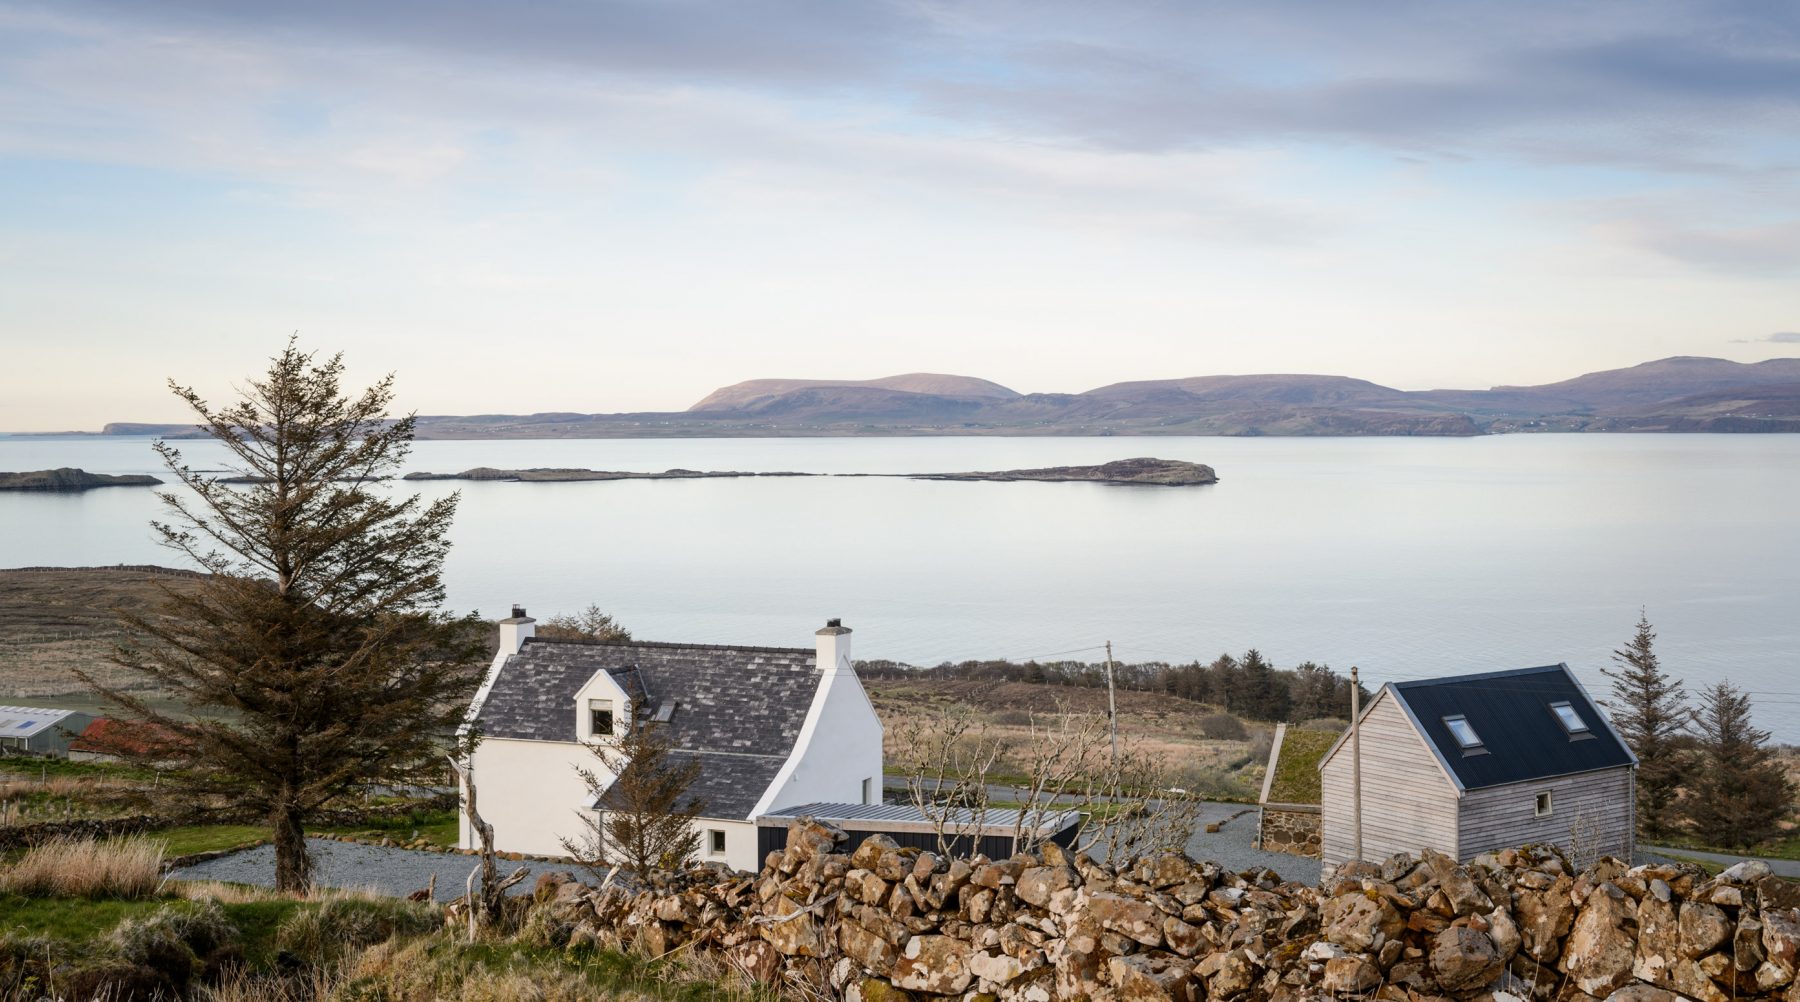 Mint Croft Cottages from Ben Geary and out to Loch Snizort and the Ascribe Islands.